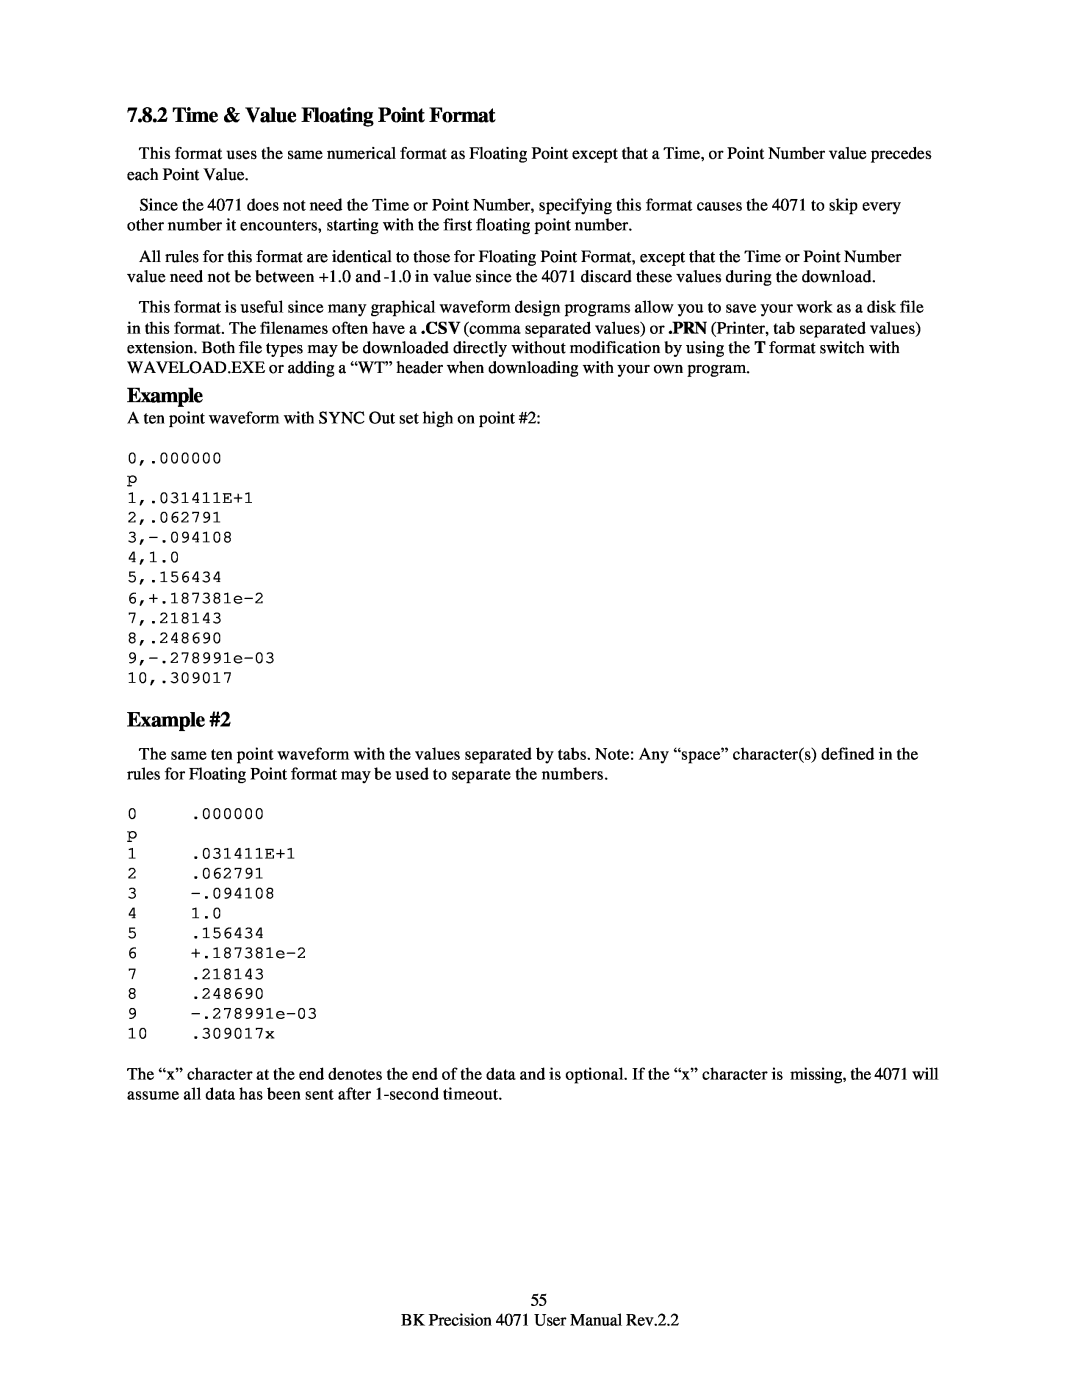 B&K 4071 user manual Time & Value Floating Point Format, Example #2 